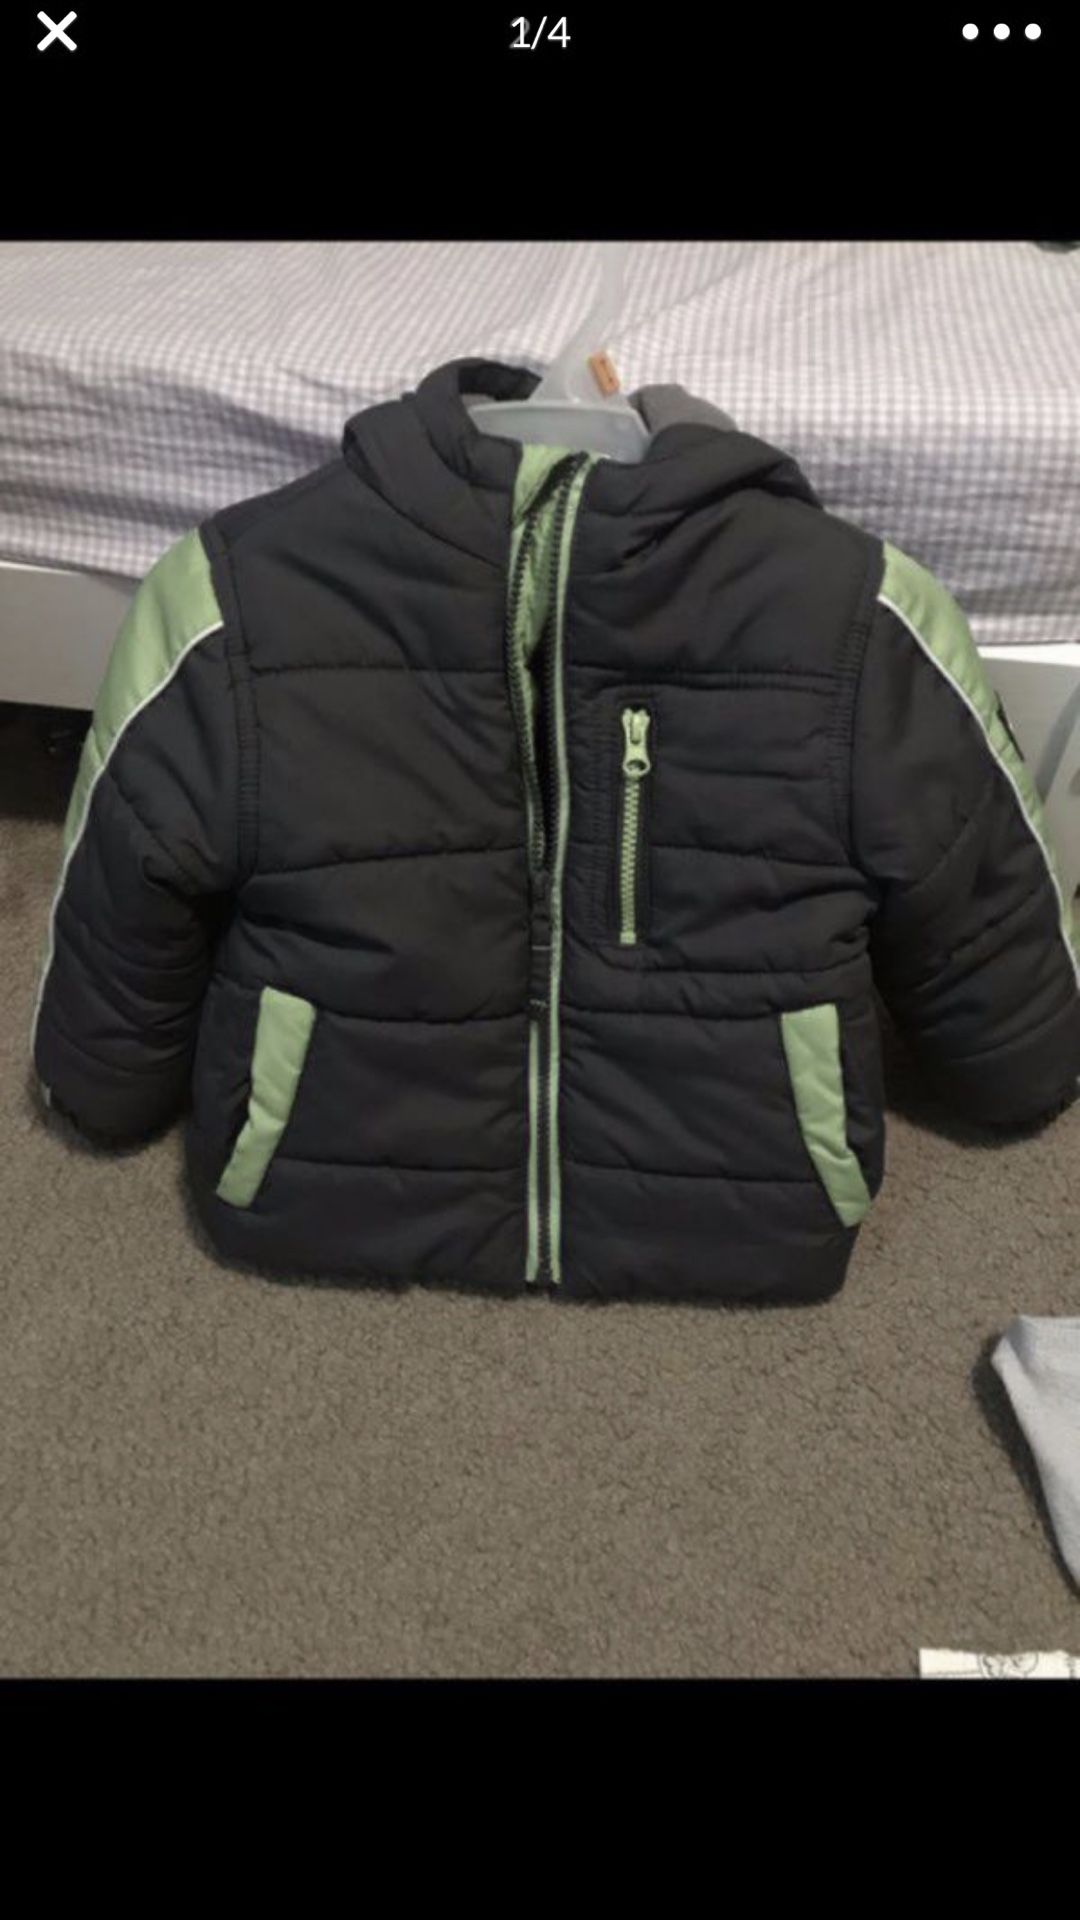 Toddler boy jacket size 2t-3t excellent condition doesn’t fit my son anymore pick up only